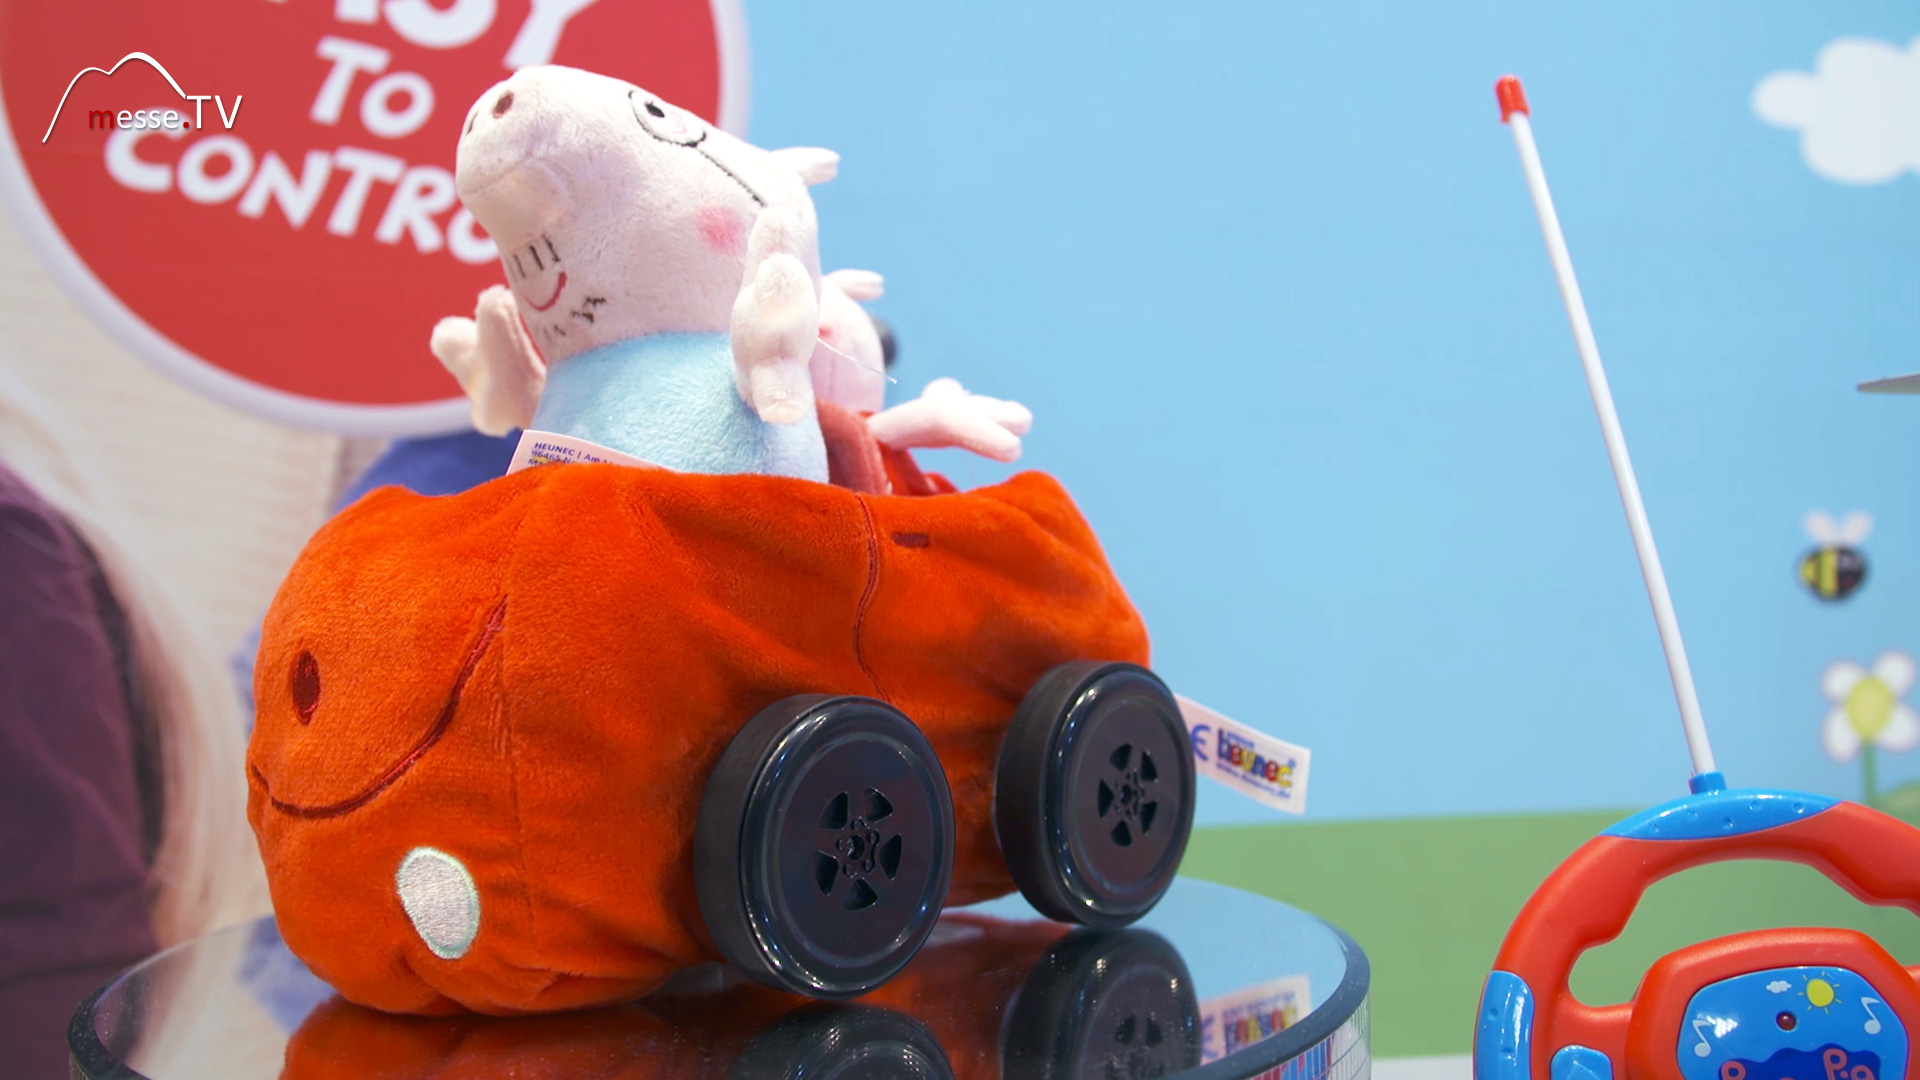 Peppa Pig remote controlled car made of plush